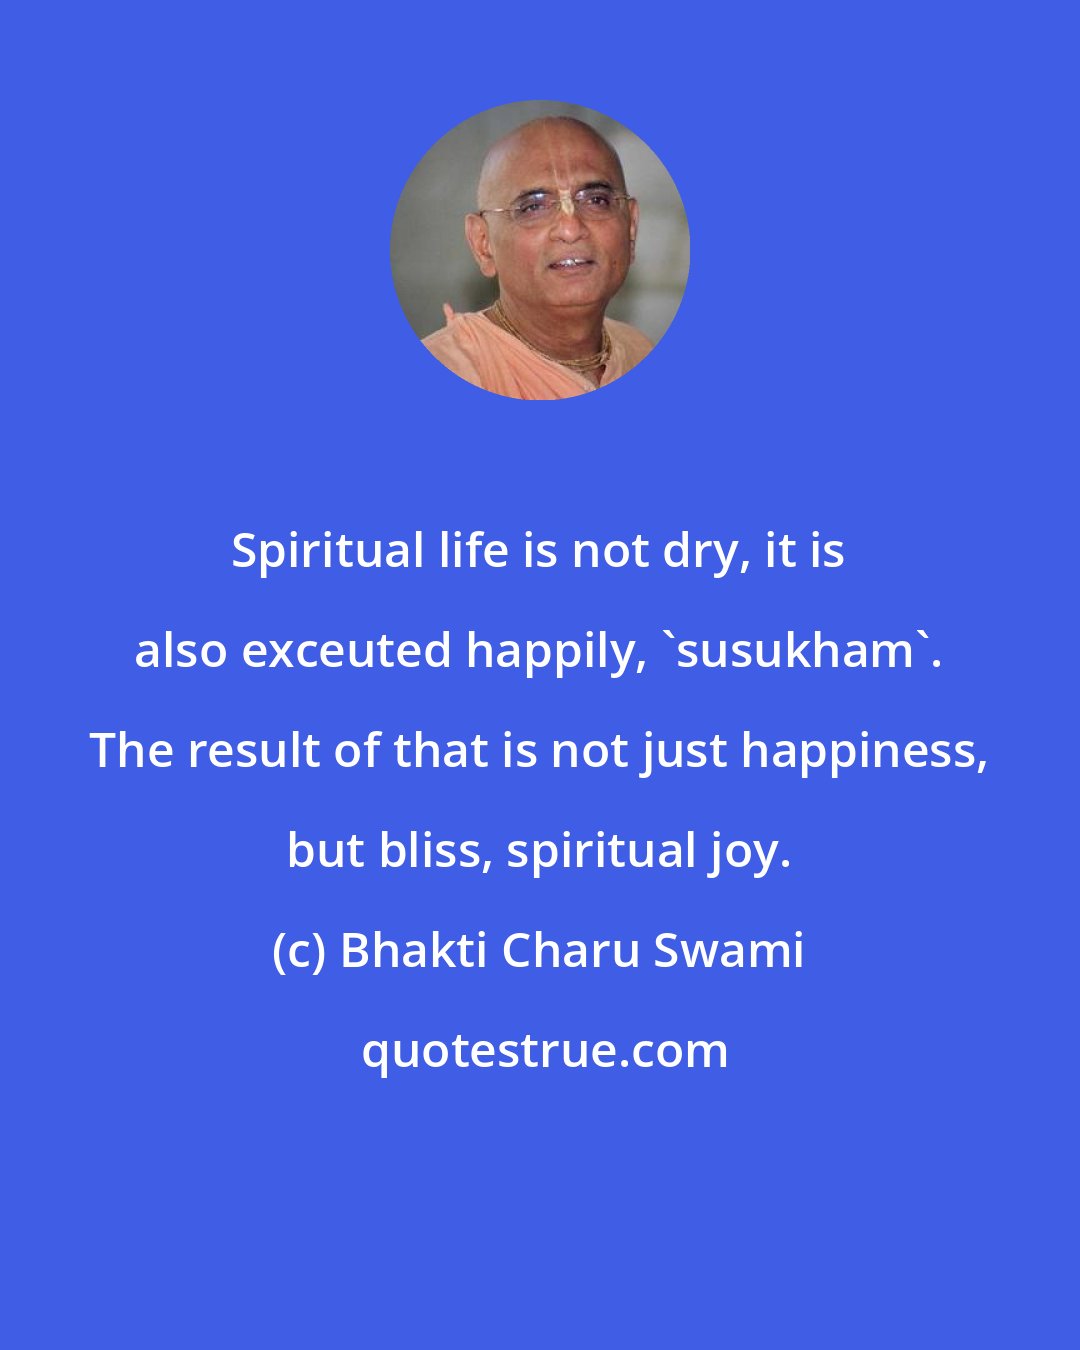 Bhakti Charu Swami: Spiritual life is not dry, it is also exceuted happily, 'susukham'. The result of that is not just happiness, but bliss, spiritual joy.